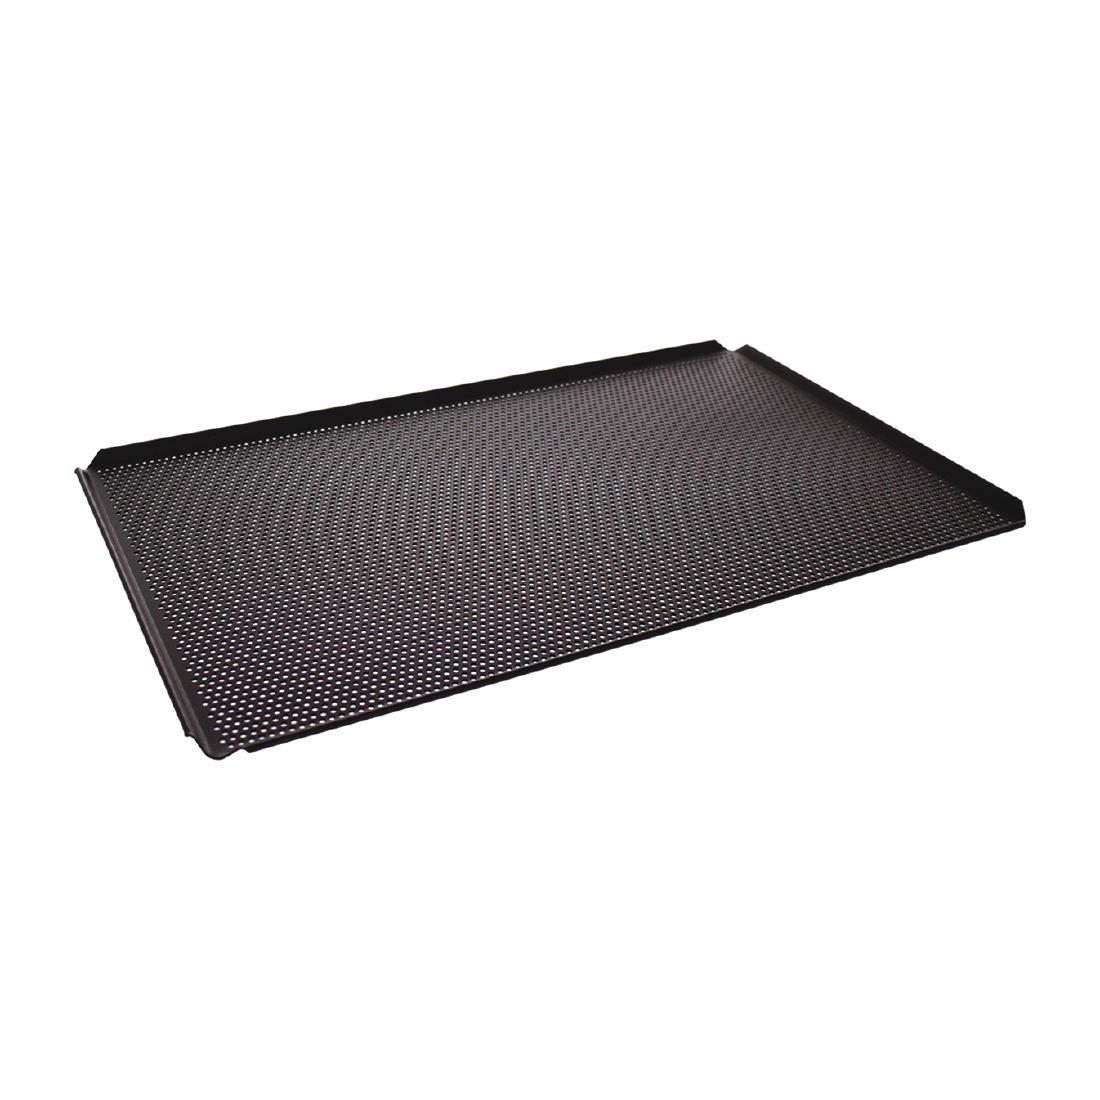 Schneider Tyneck Non-Stick Perforated Baking Tray 600 x 400mm - DW285  - 1